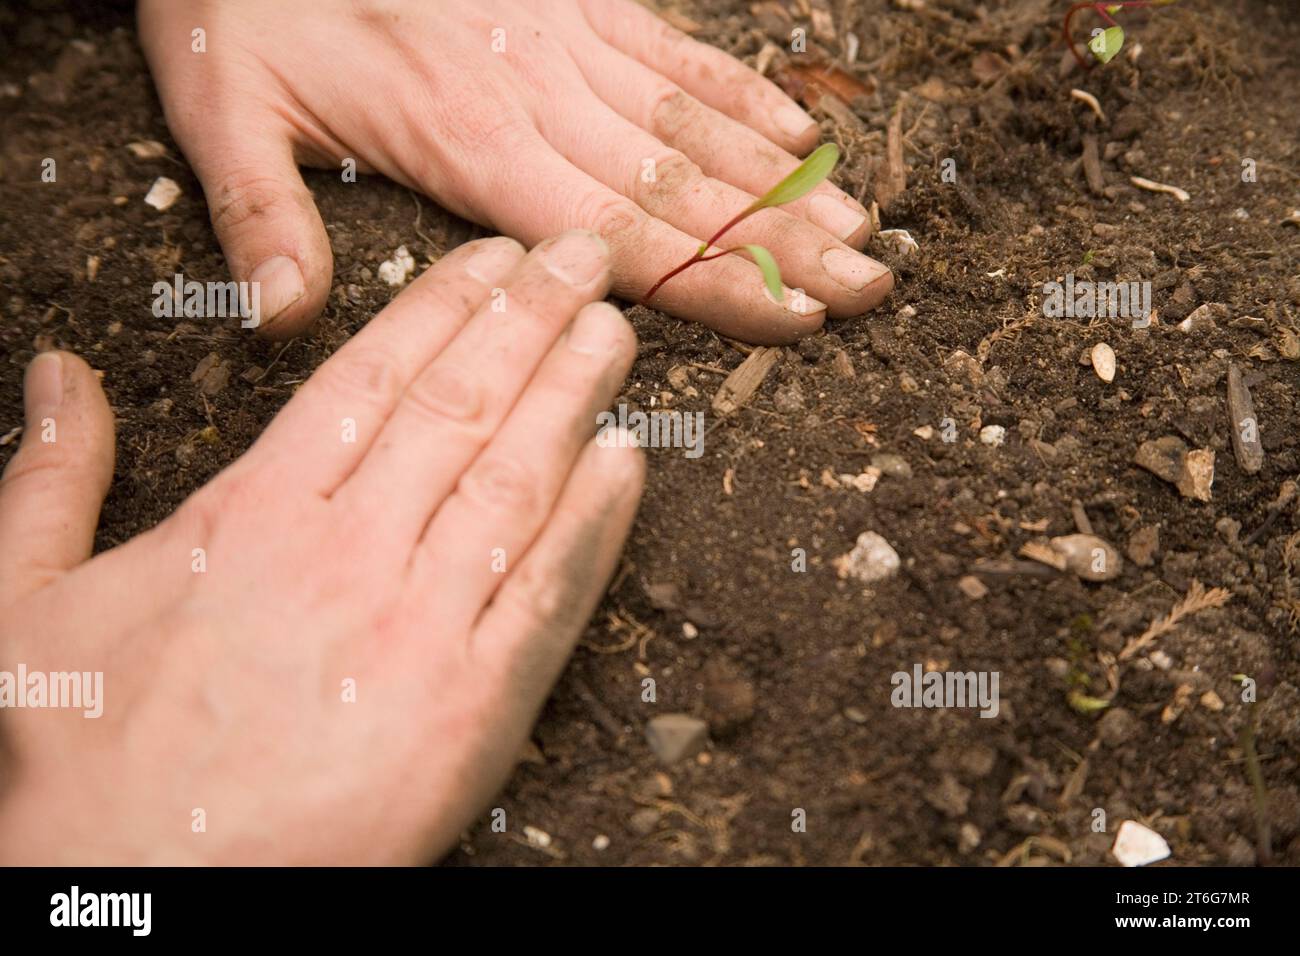 Close up view of a woman planting lettuce seedlings in a backyard garden. Stock Photo